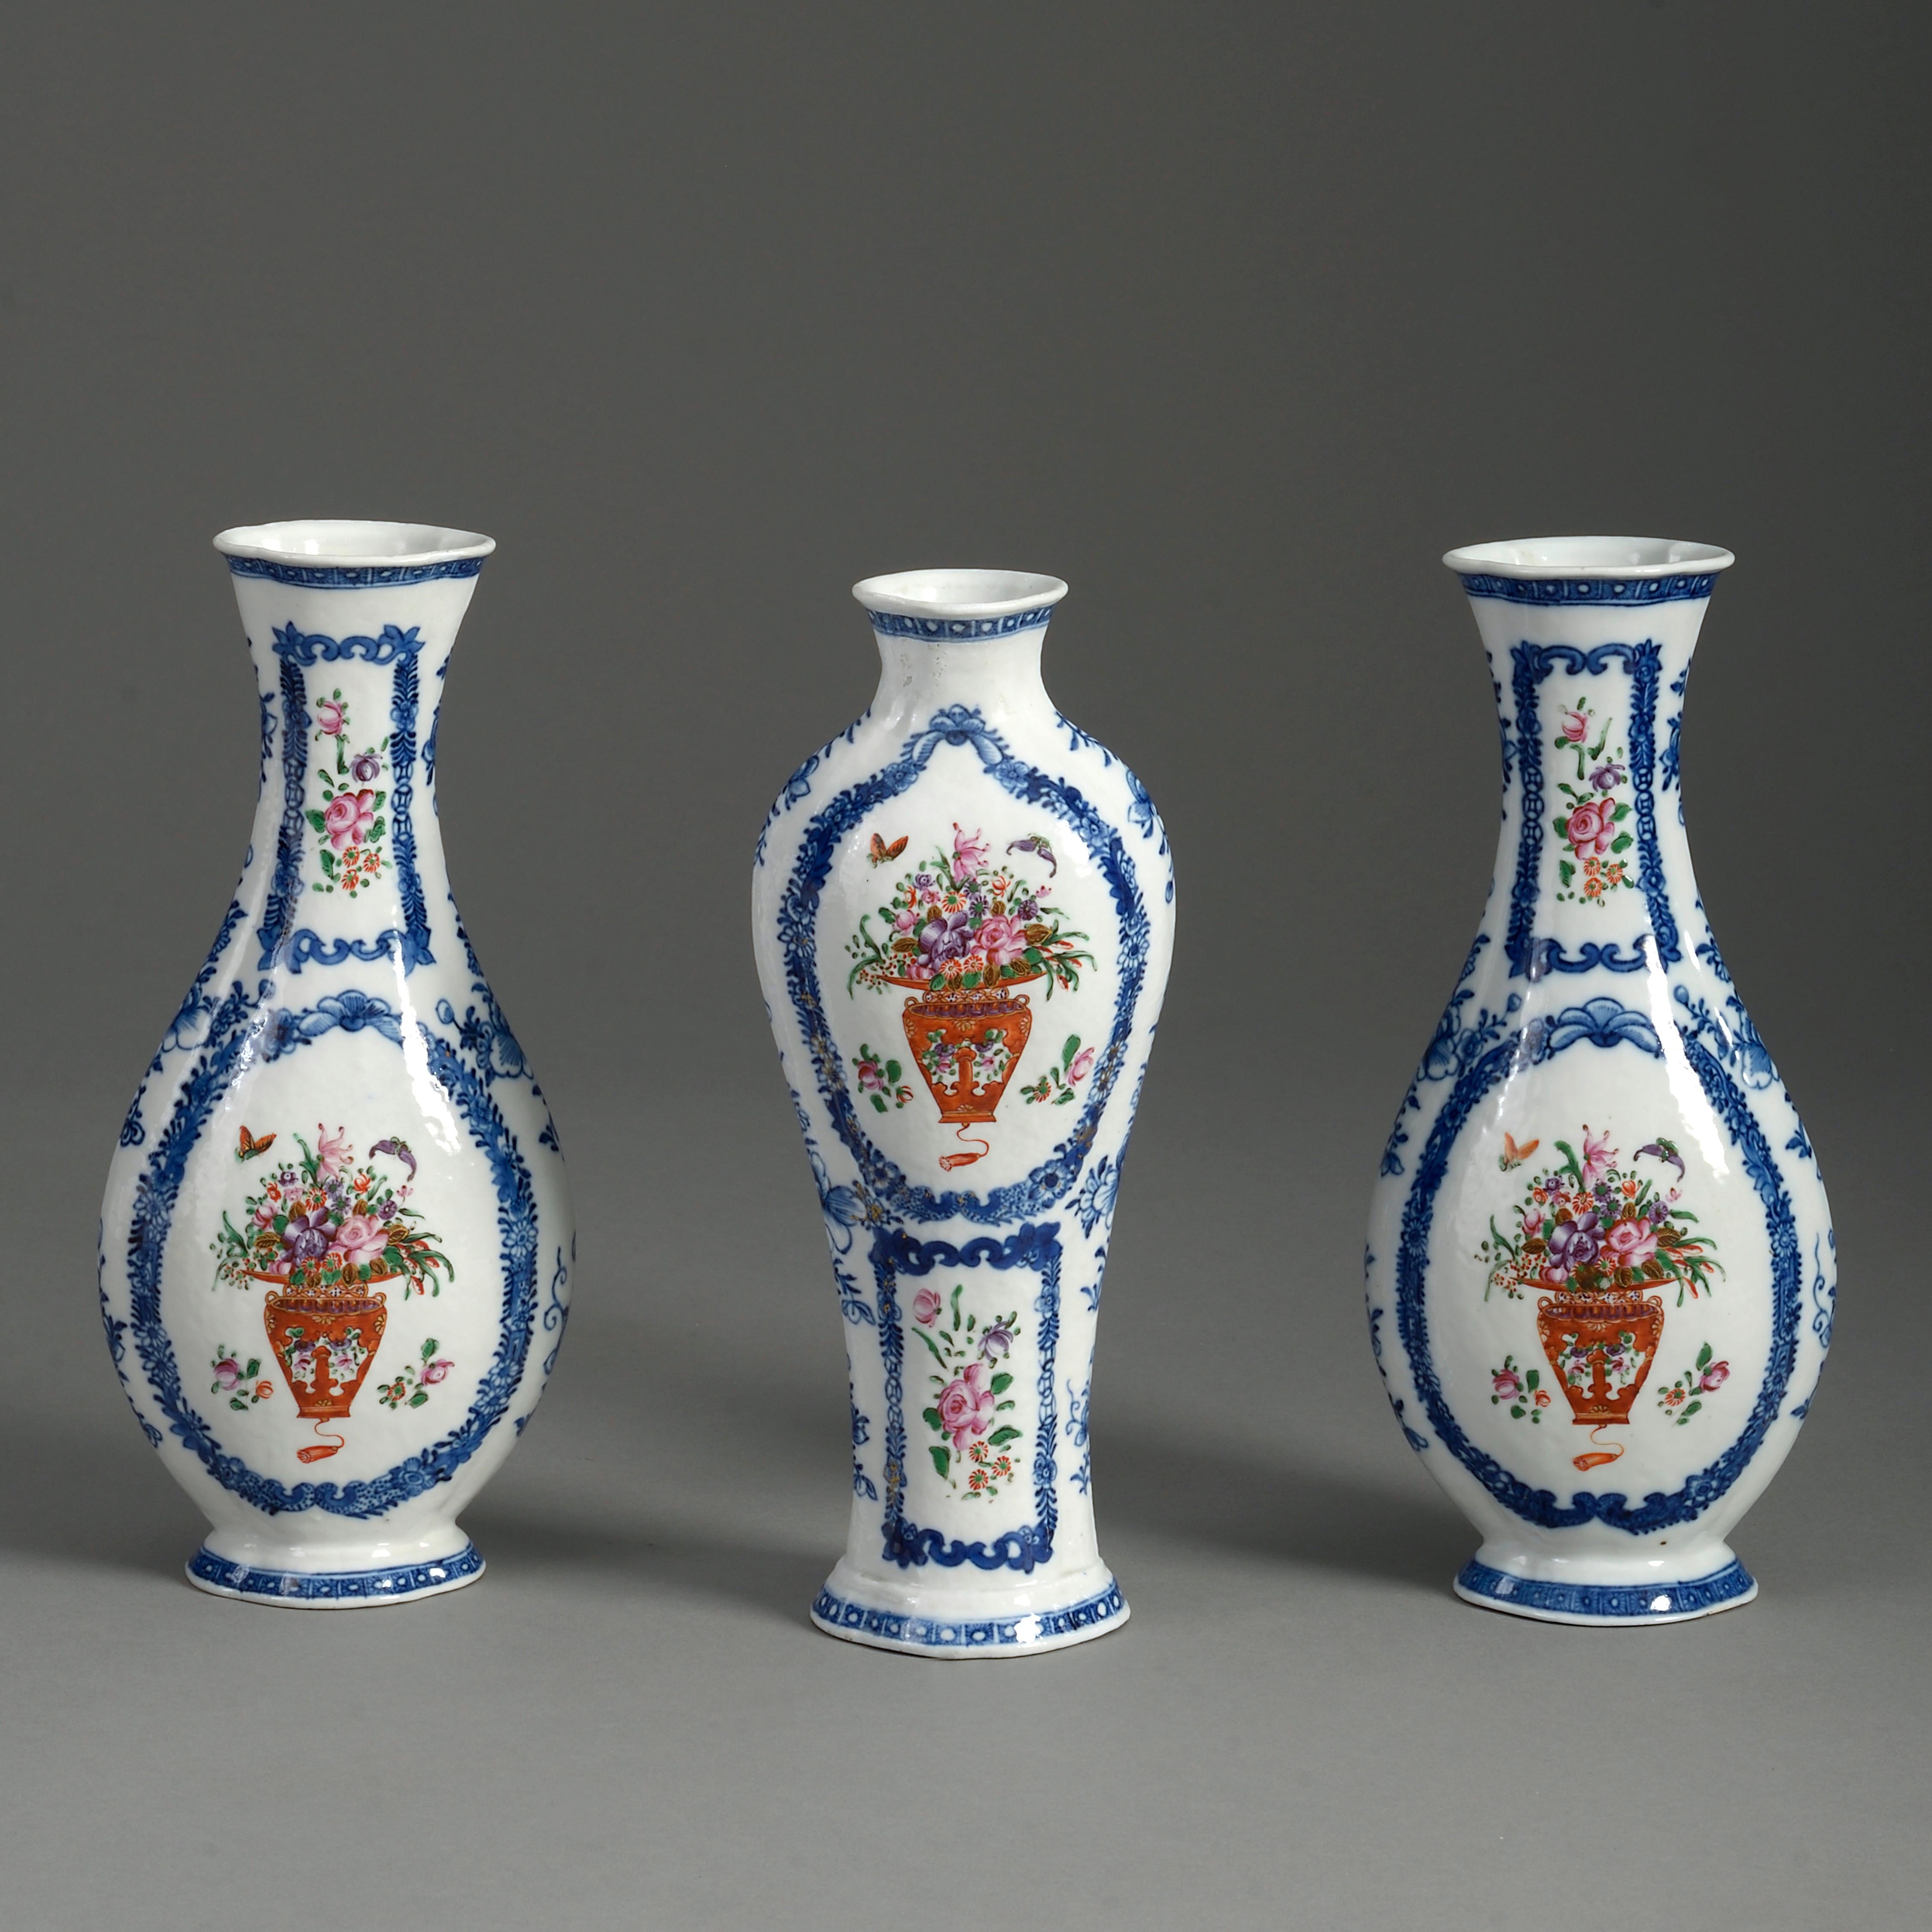 A garniture of three late 18th century porcelain vases, decorated with floral decoration upon a white ground.

Qing Dynasty, Qianlong Period

(One neck restored).